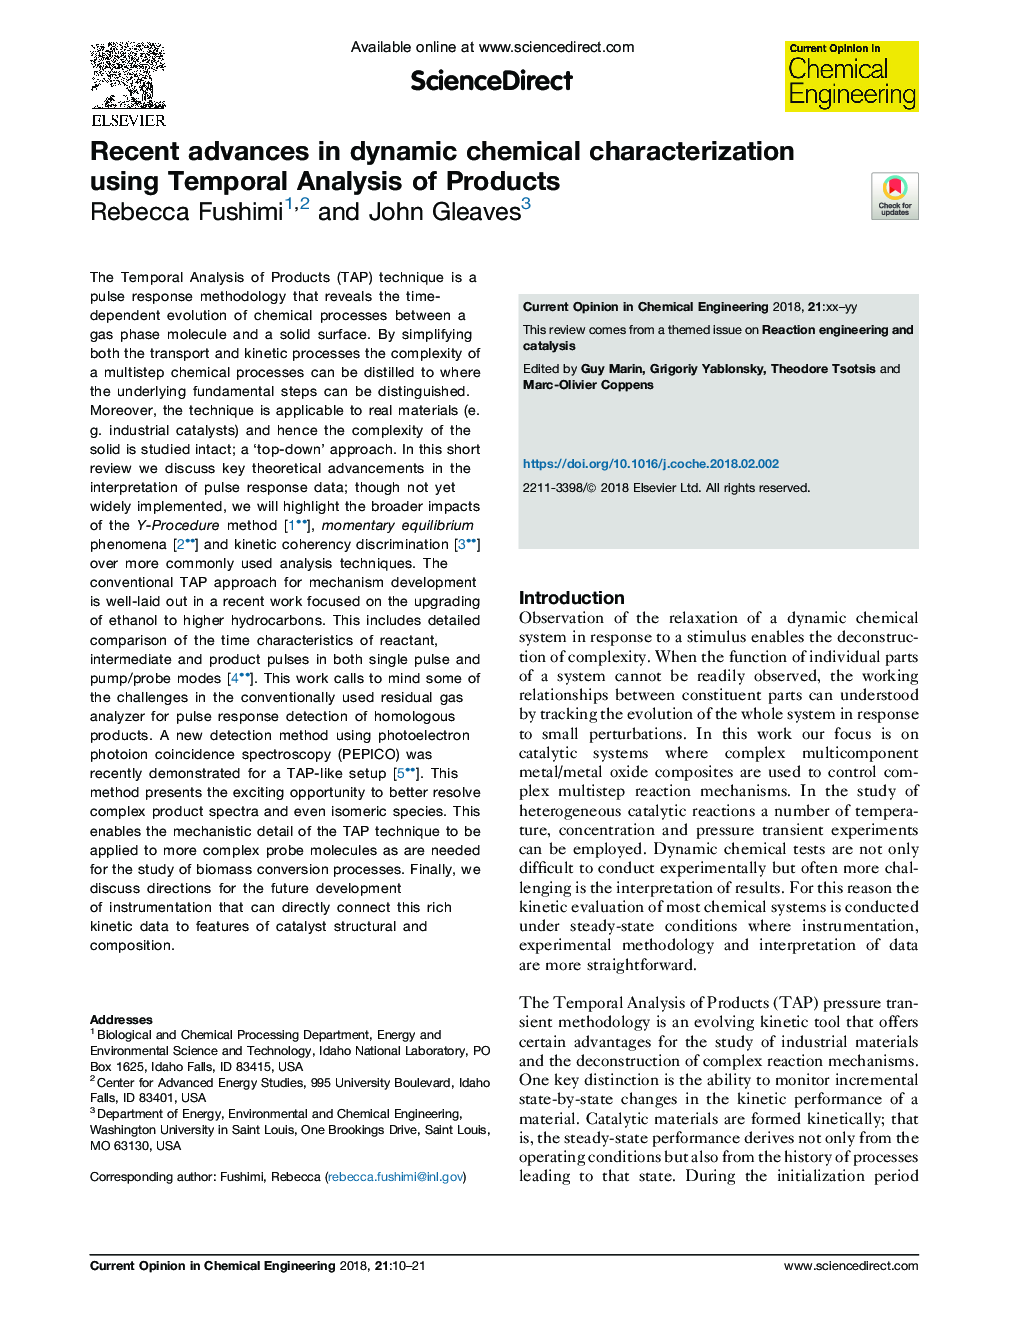 Recent advances in dynamic chemical characterization using Temporal Analysis of Products